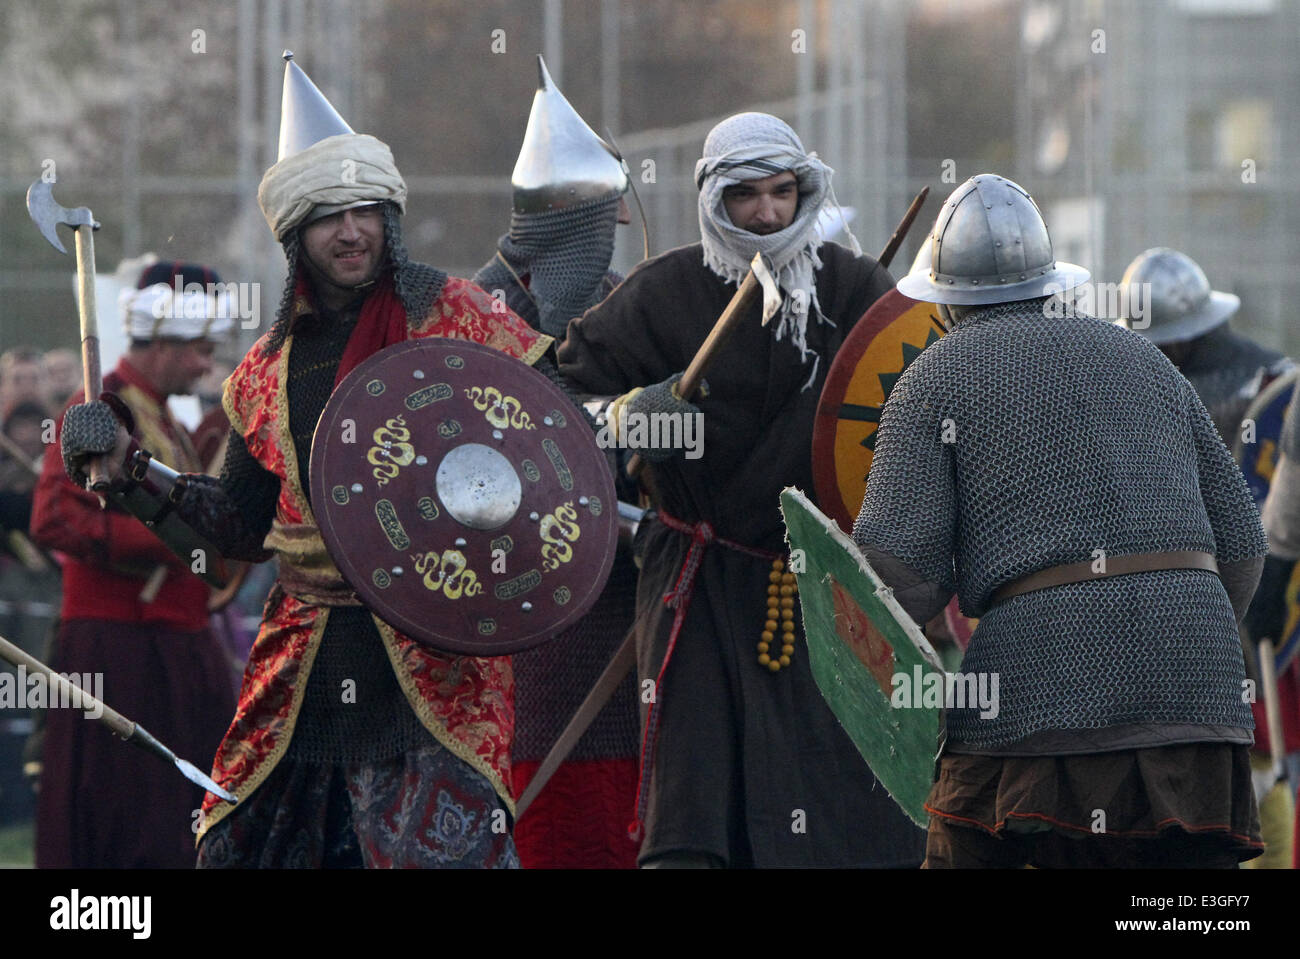 Bulgarian, Czech and Polish amateur actors re-enact a scene from the battle of Polish King Wladyslaw III Warnenczyk against Ottoman Turks 569 years ago near the town of Varna. About a hundred history enthusiasts and amateur actors gathered near the town o Stock Photo